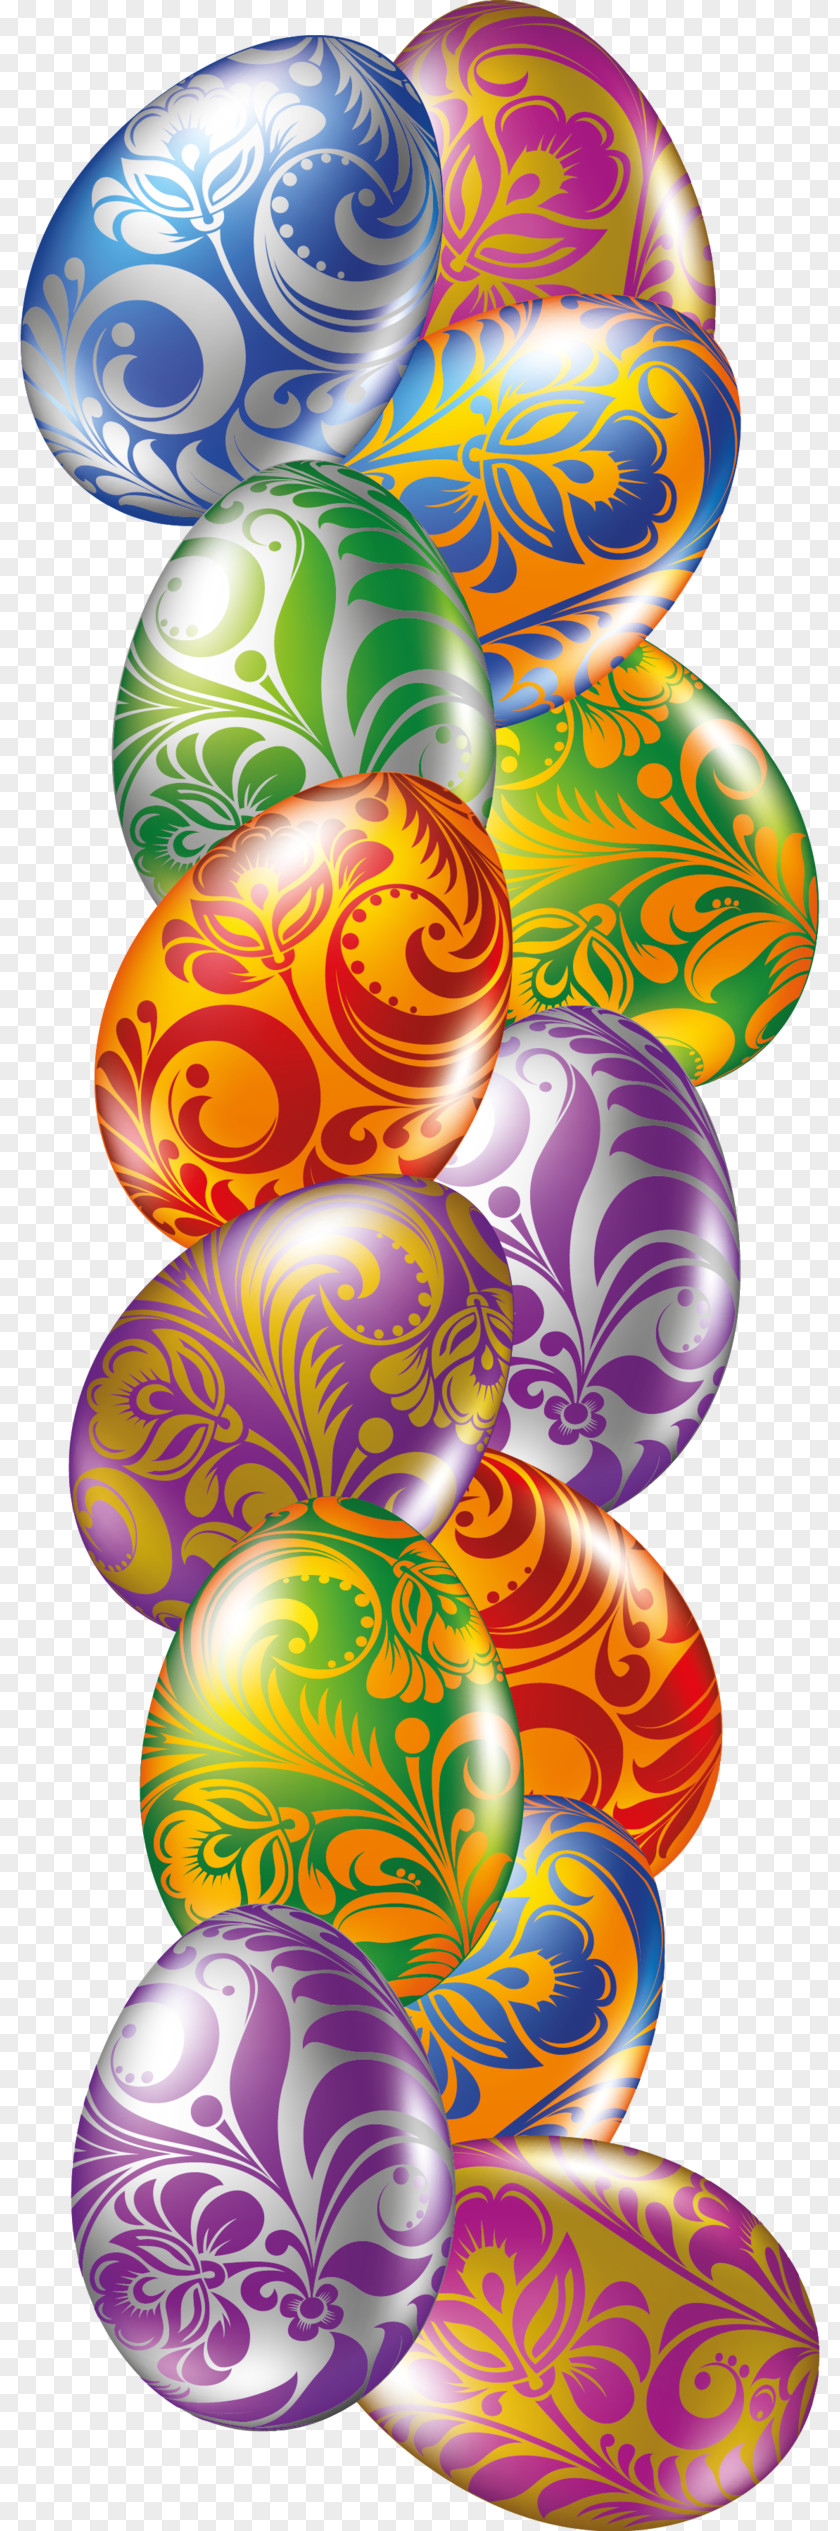 Bank Holiday Glitter Easter Bunny Egg Parade PNG